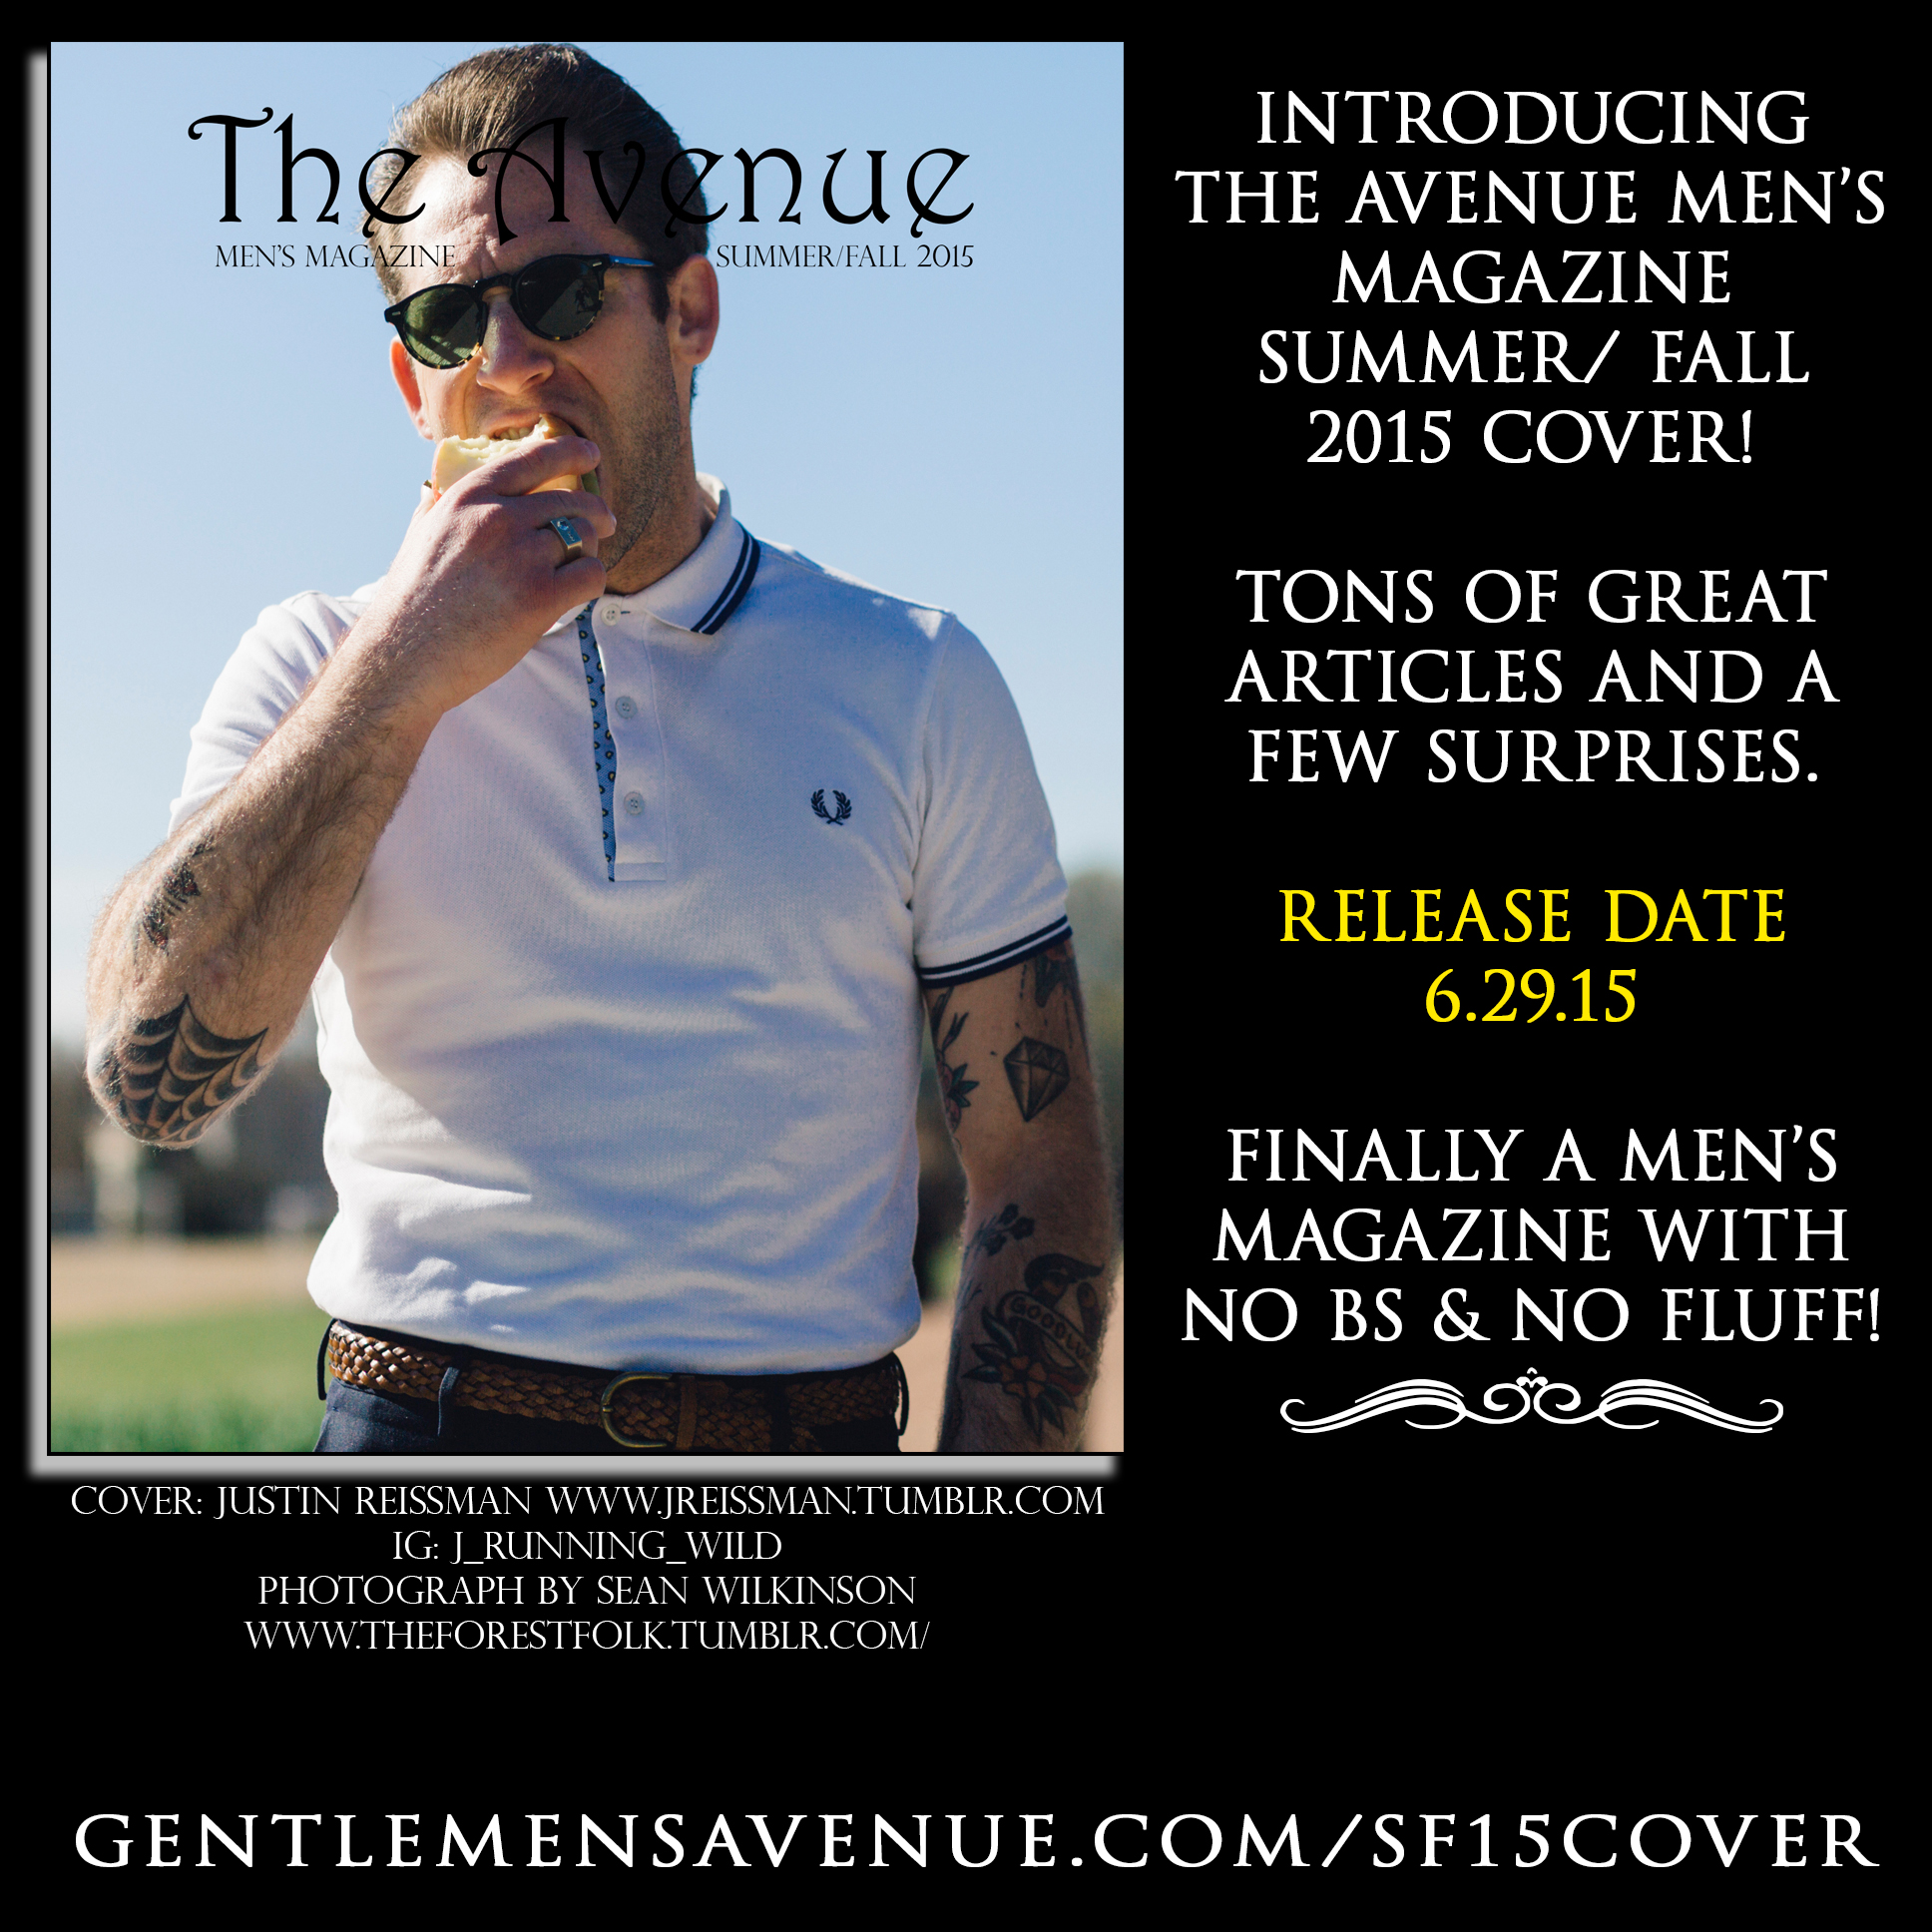 Summer Fall 2015 FRONT COVER RELEASE INSTA